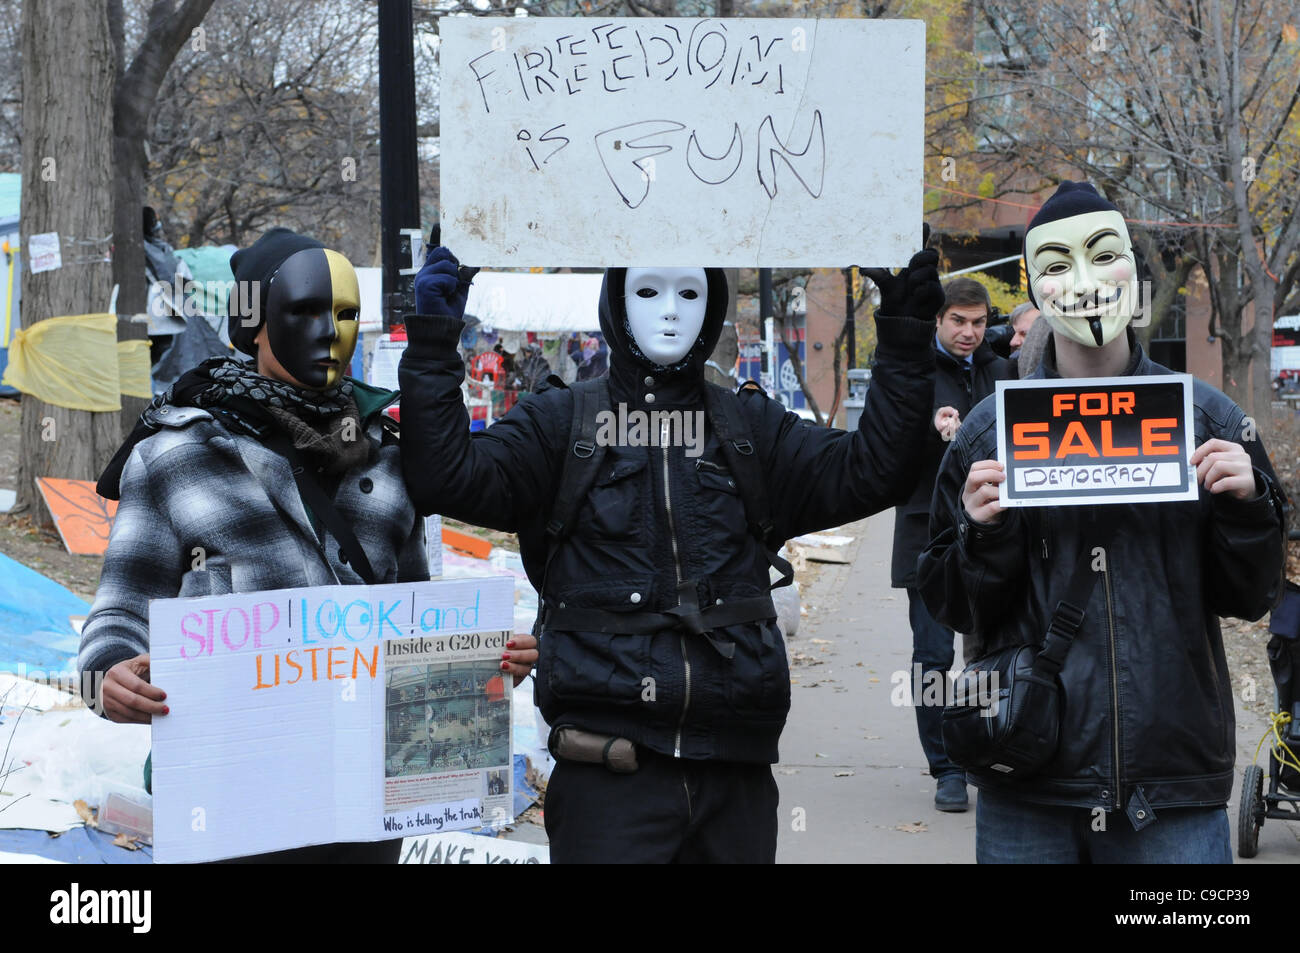 November 21, 2011, three masked protesters carry signs at St. James park following the decision handed down this morning by Ontario Superior Court judge David Brown, upholding the Occupy Toronto tent camp eviction. Stock Photo